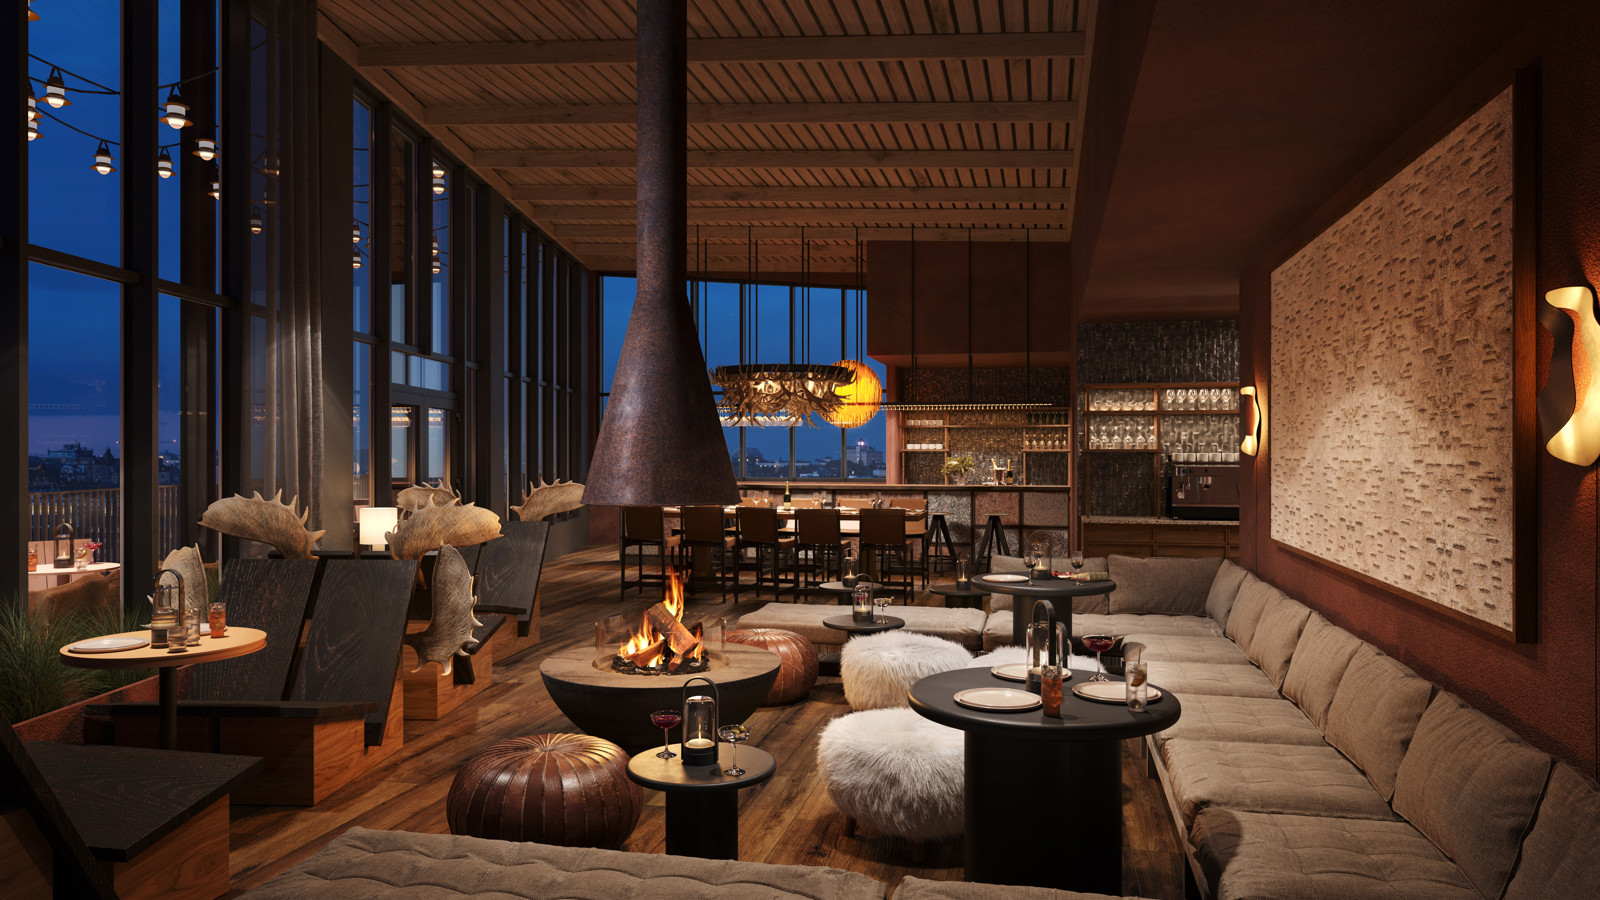  Cozy bar with a fireplace and plenty of seating.